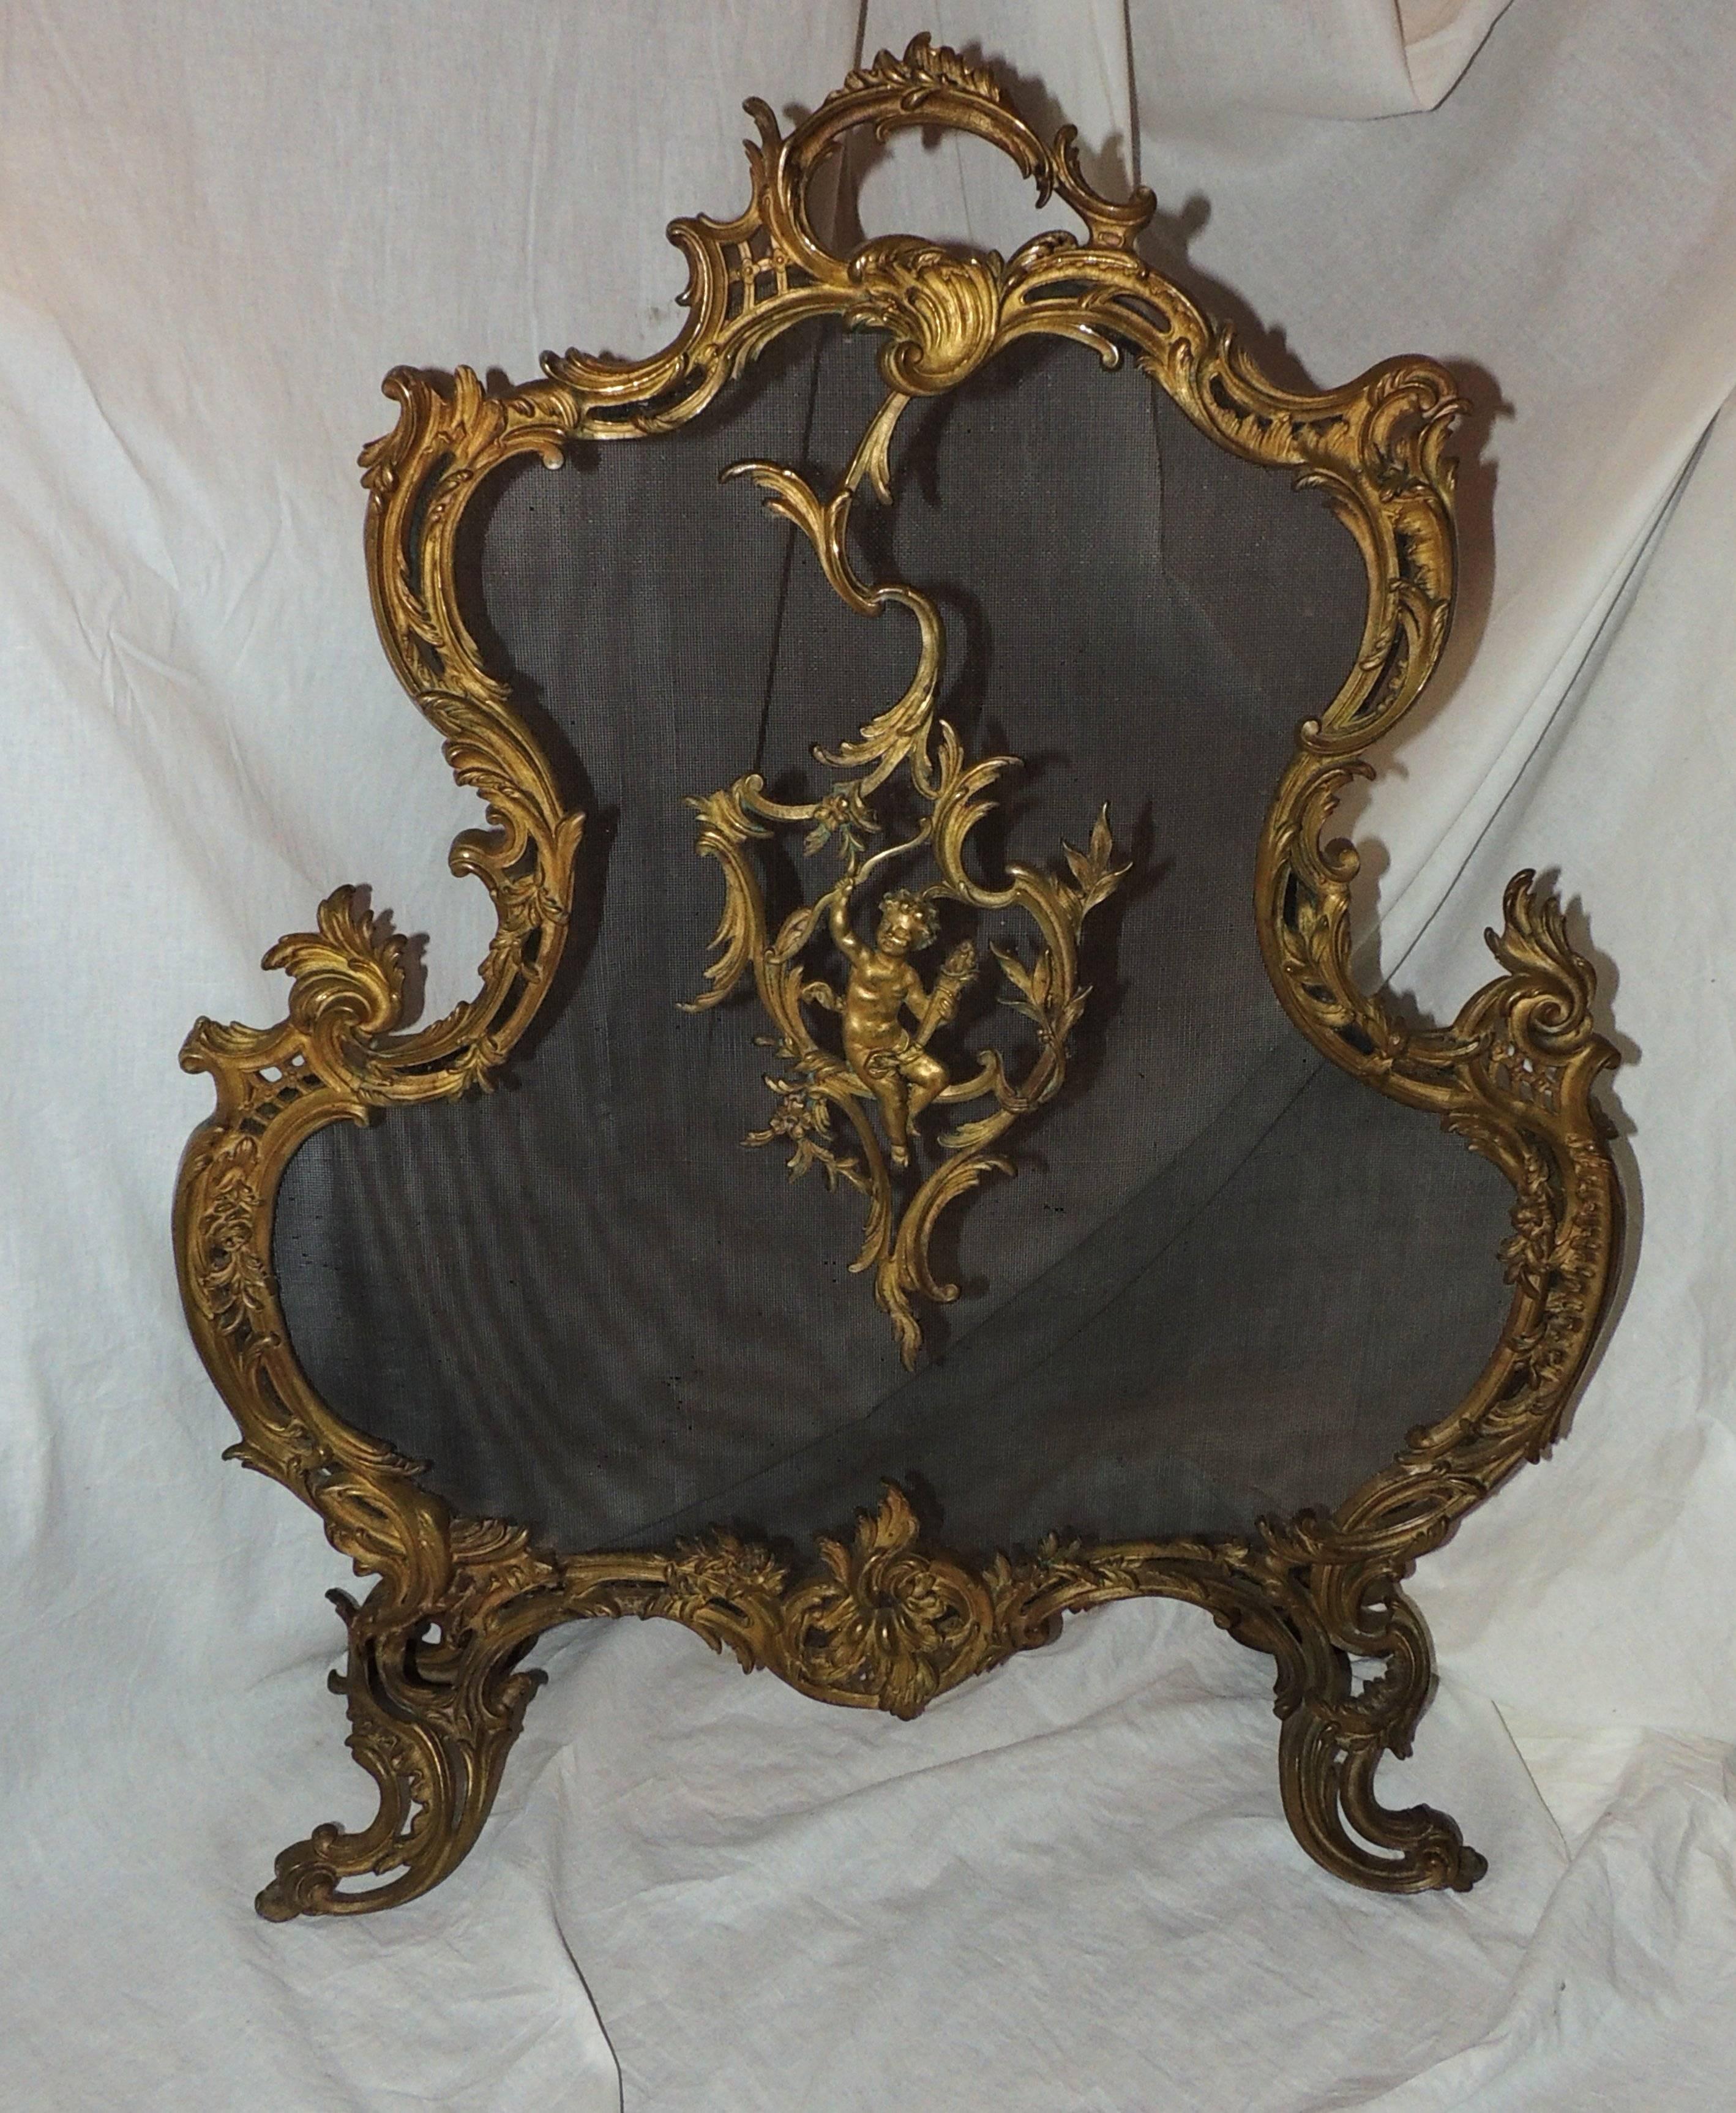 Wonderful French gilt bronze figural cherub Rococo fireplace screen
Beautiful aged bronze fireplace screen with scroll filigree and cherub in center medallion.

Measures: 36" H x 29" W x 8" D.